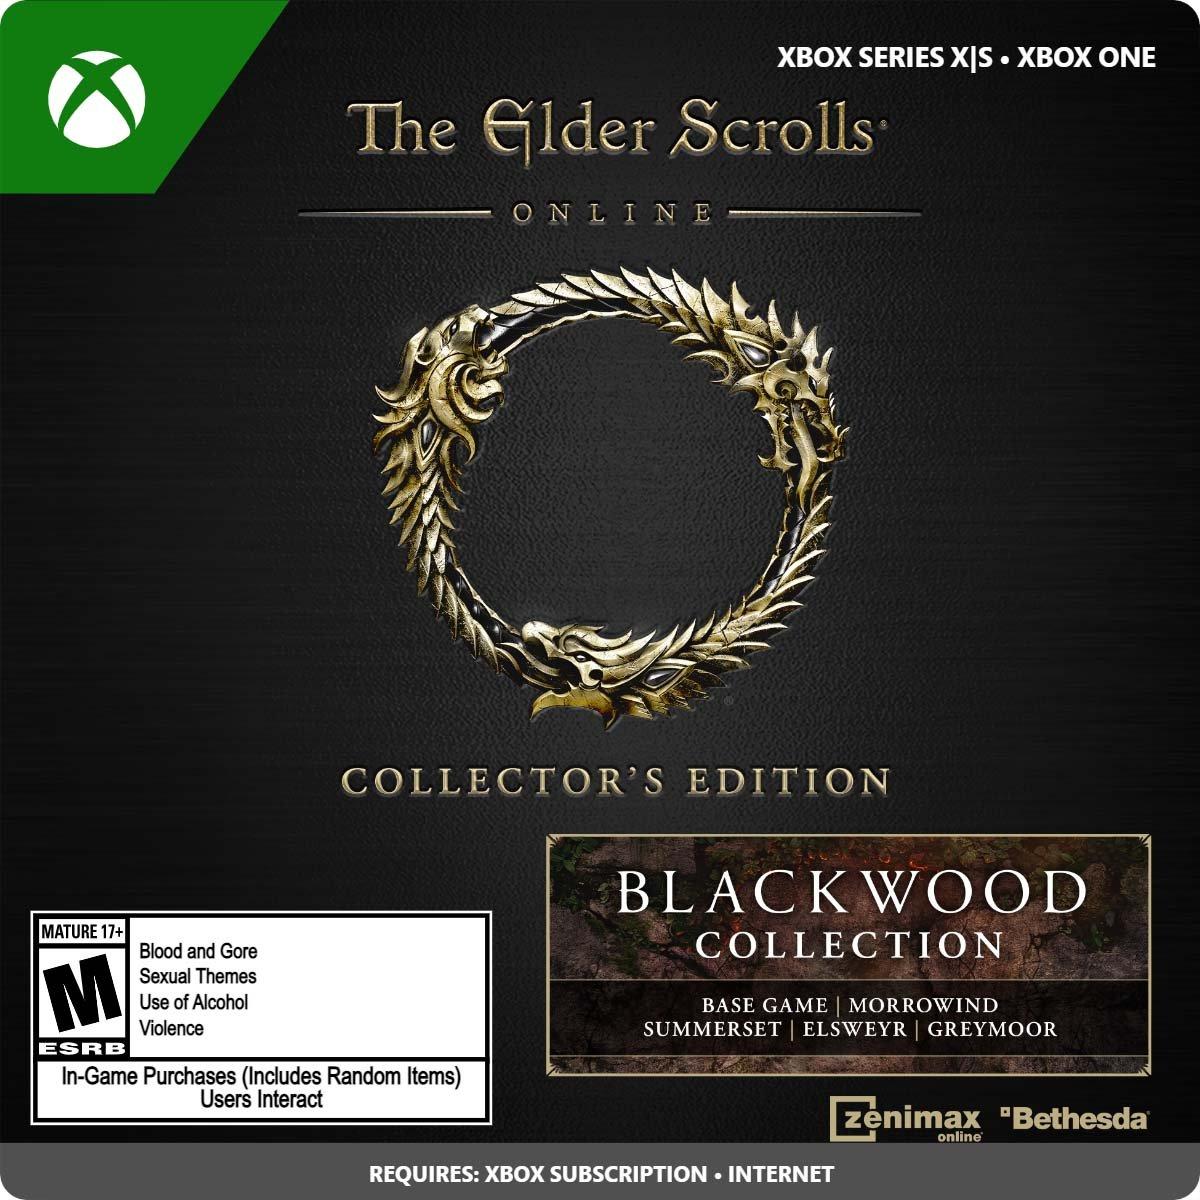 The Elder Scrolls Online Collection: Blackwood Collector's - Xbox One